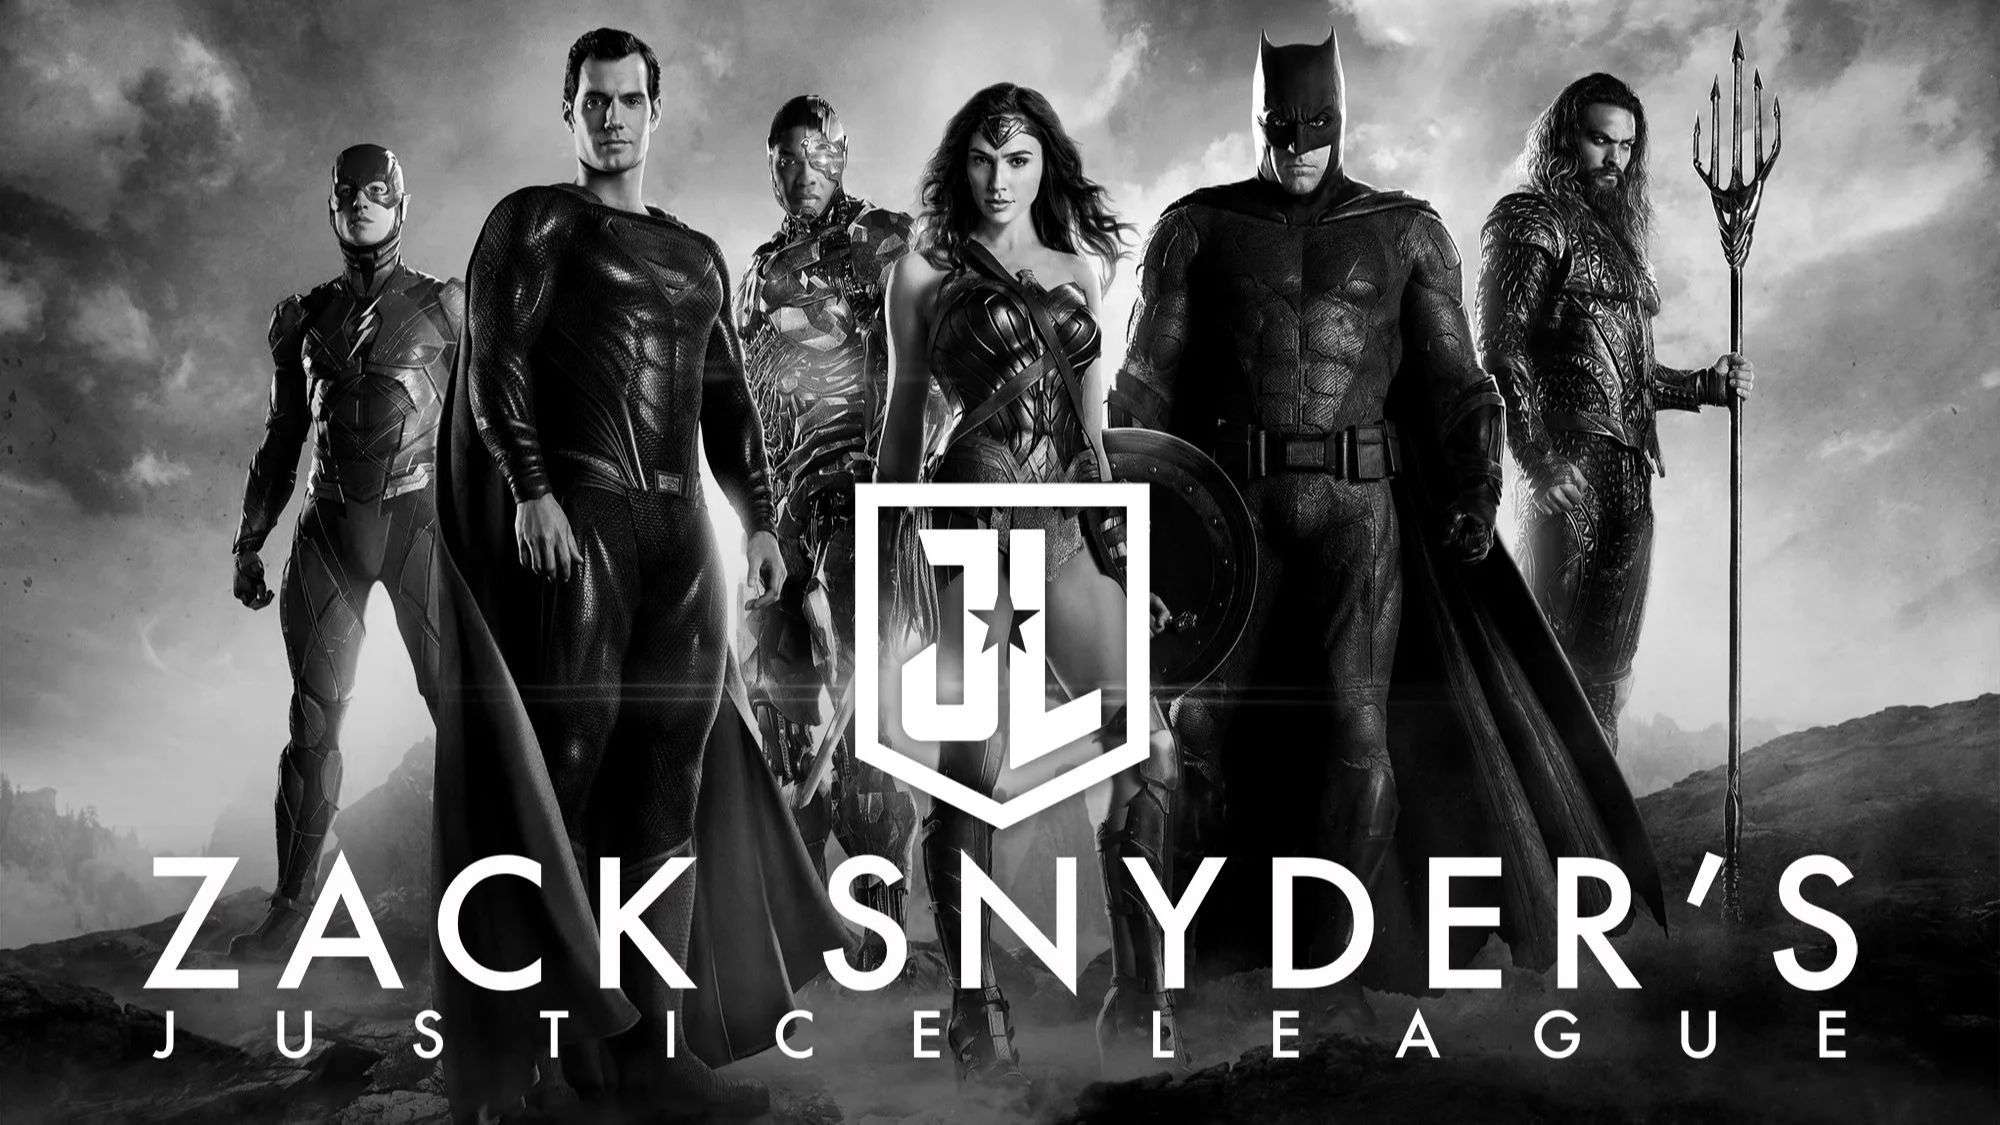 Where and how to watch Zack Snyders Justice League in India?